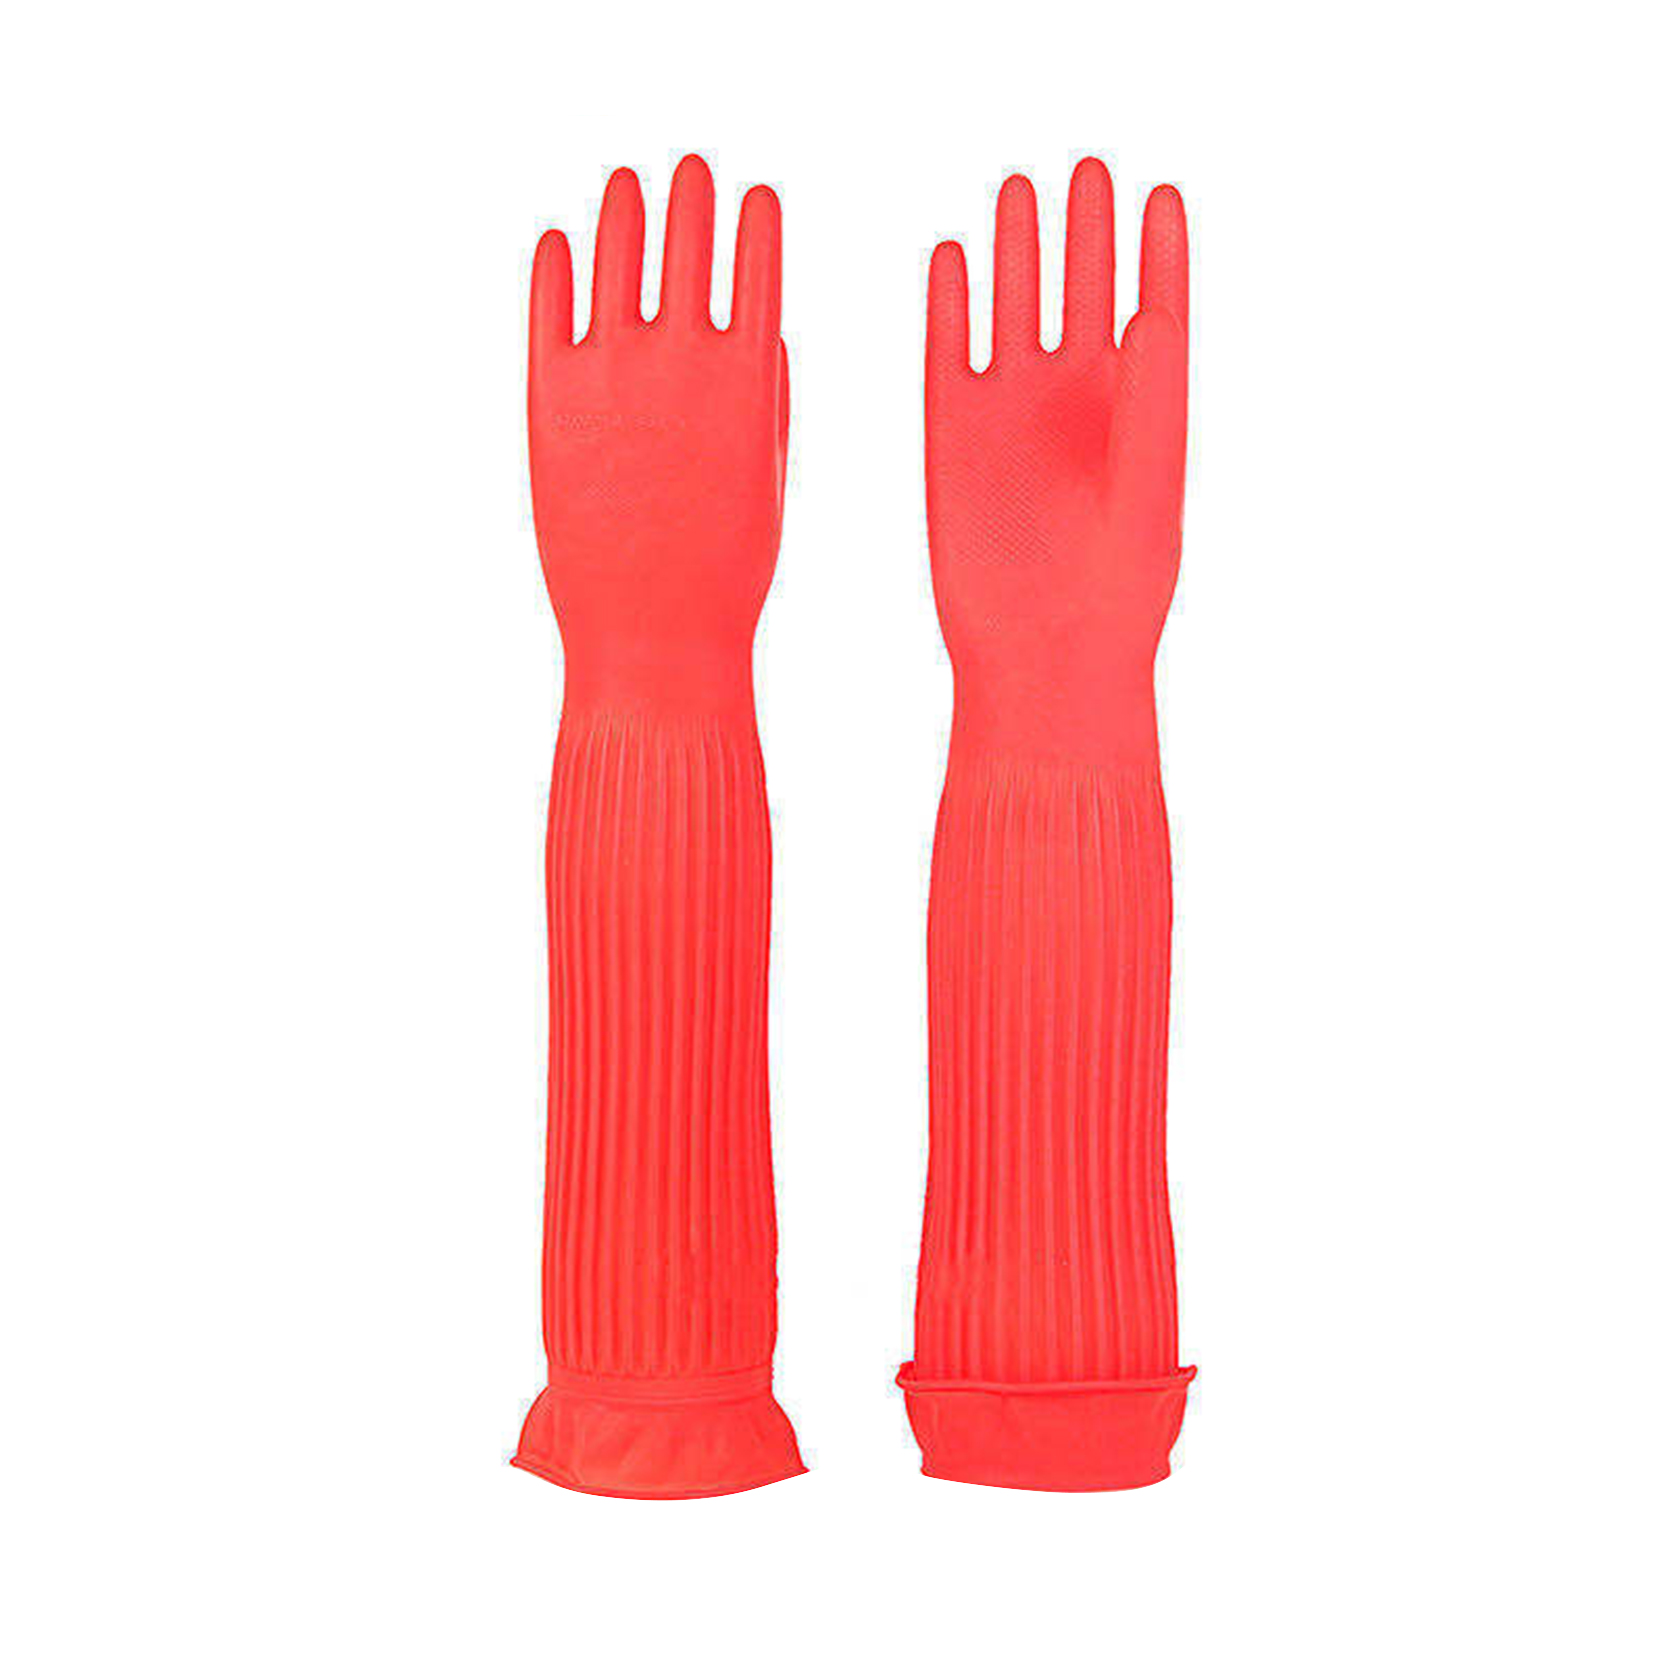 Wholesale 58cm Red Extra Long Latex Household Gloves Reusable Waterproof Household Dishwashing Cleaning Rubber Gloves, Non-Slip Kitchen Glove